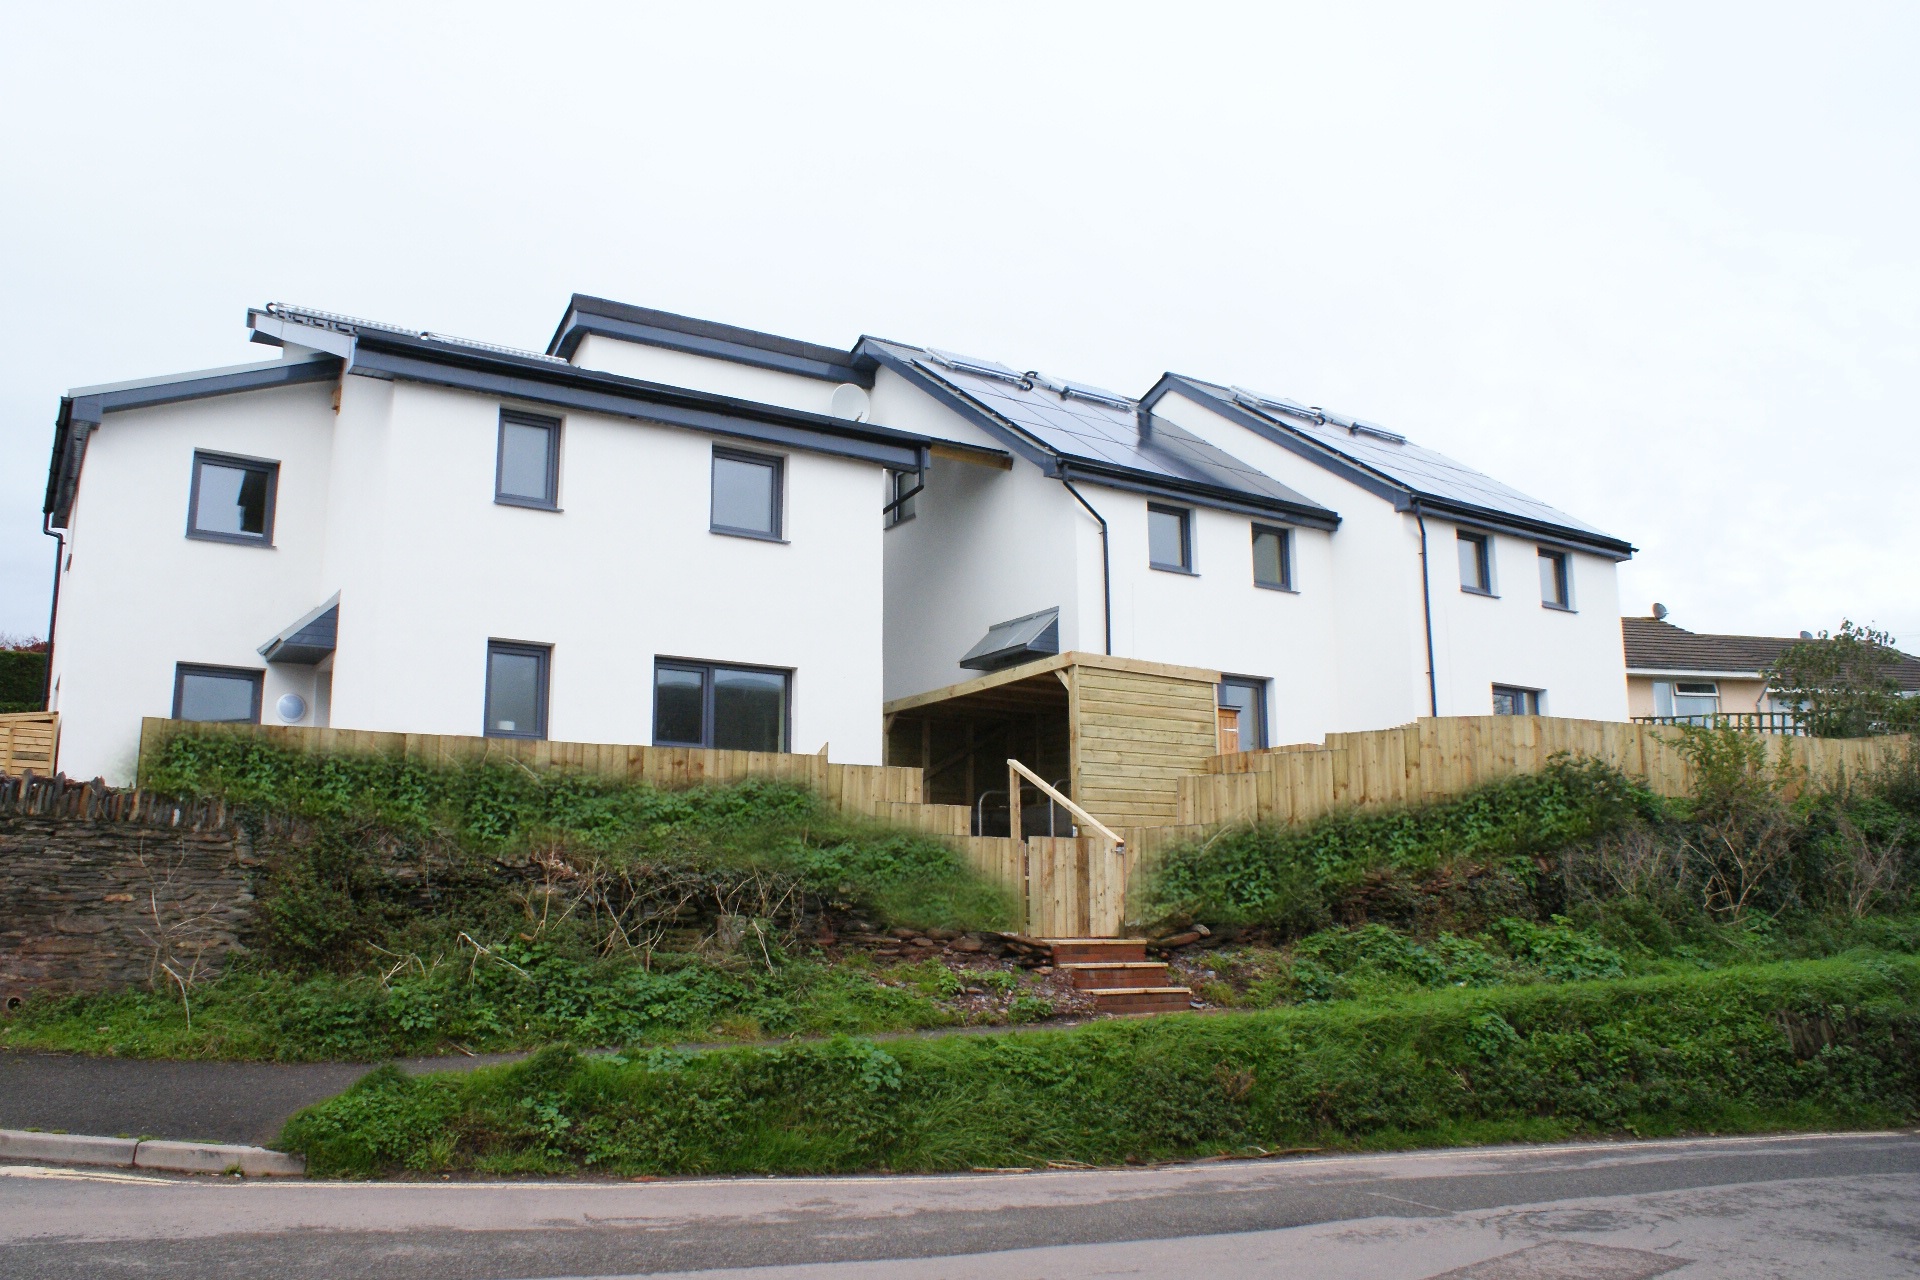 code for sustainable homes, Code 5, passivhaus, Social Housing, timber frame, affordable housing, sustianble housing, thurlestone, solar panels, PV, solar thermal, timber frame,  